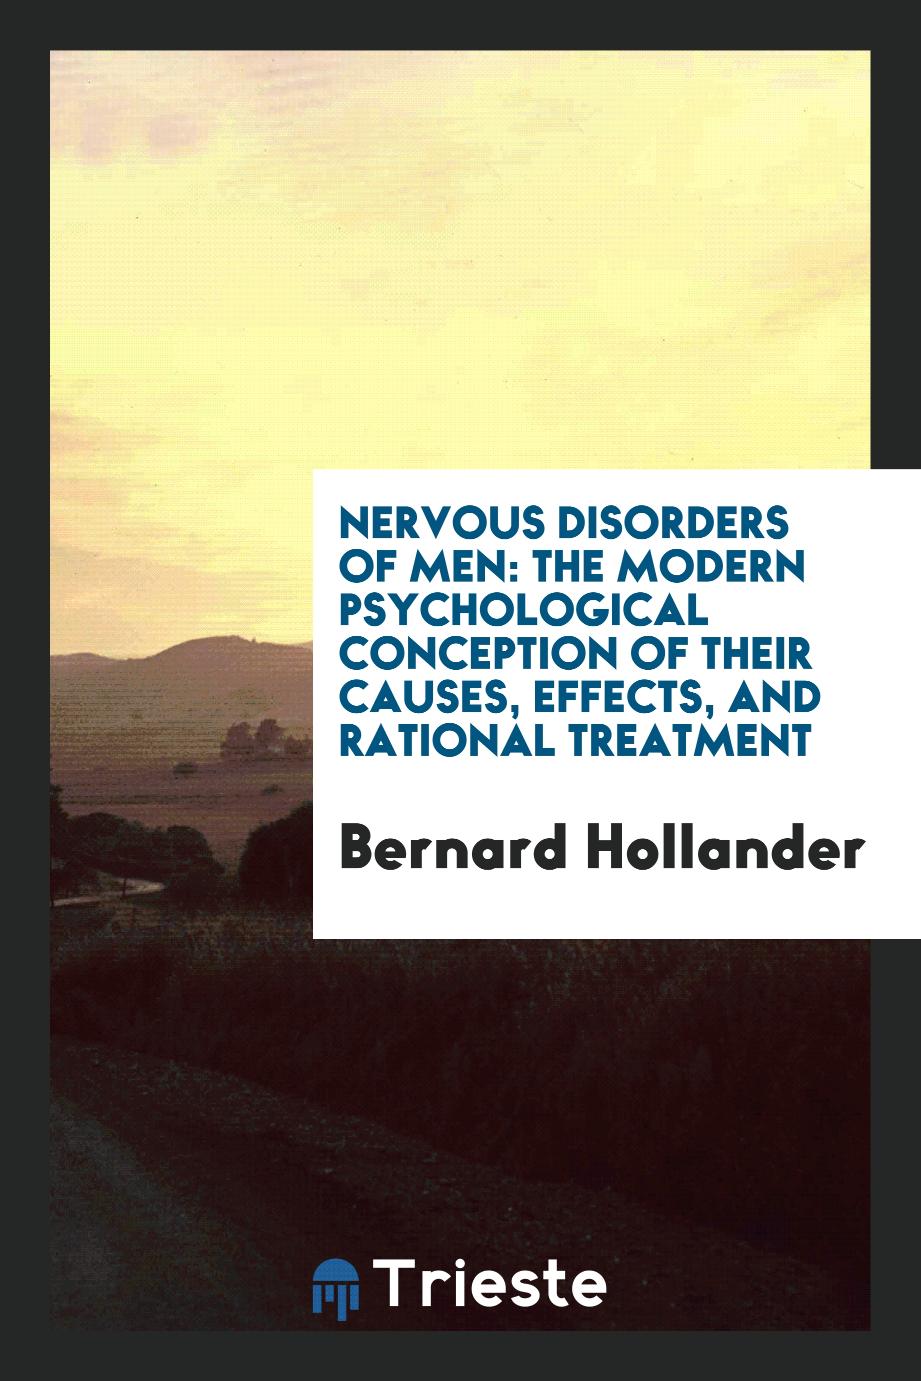 Nervous disorders of men: the modern psychological conception of their causes, effects, and rational treatment